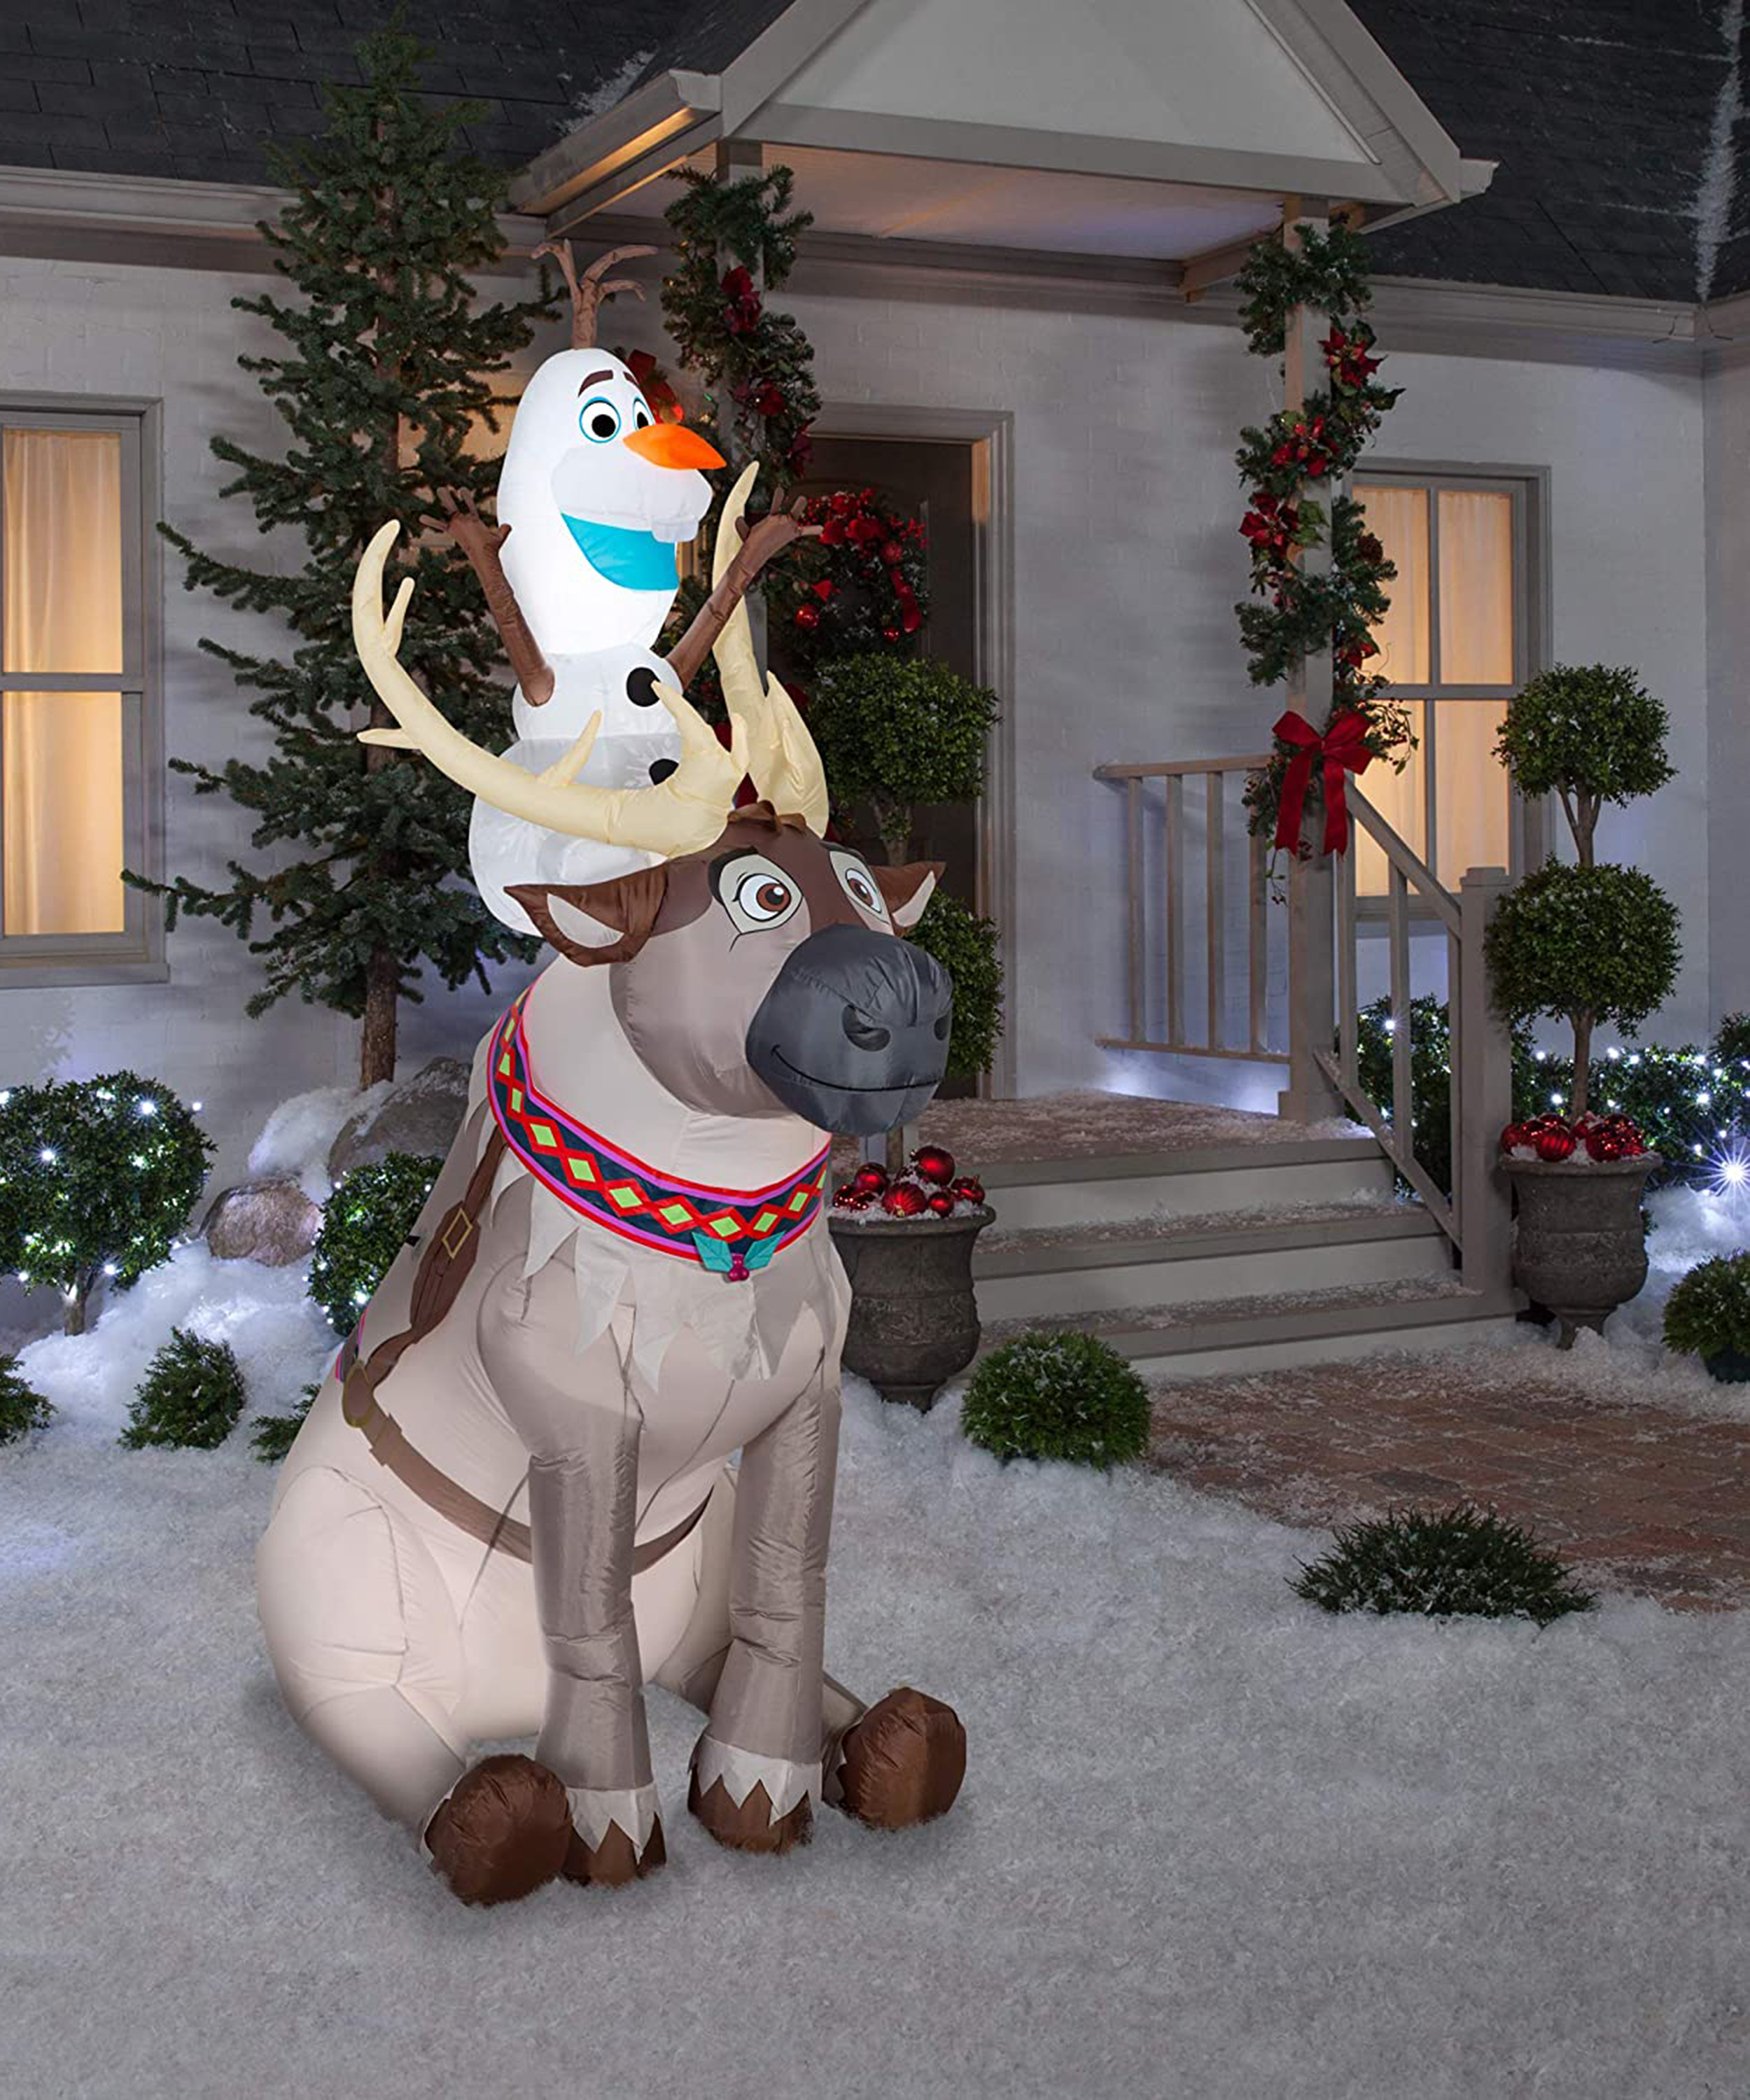 A Disney's Frozen inspired Xmas inflatable with Olaf snowman and Sven reindeer outside of house